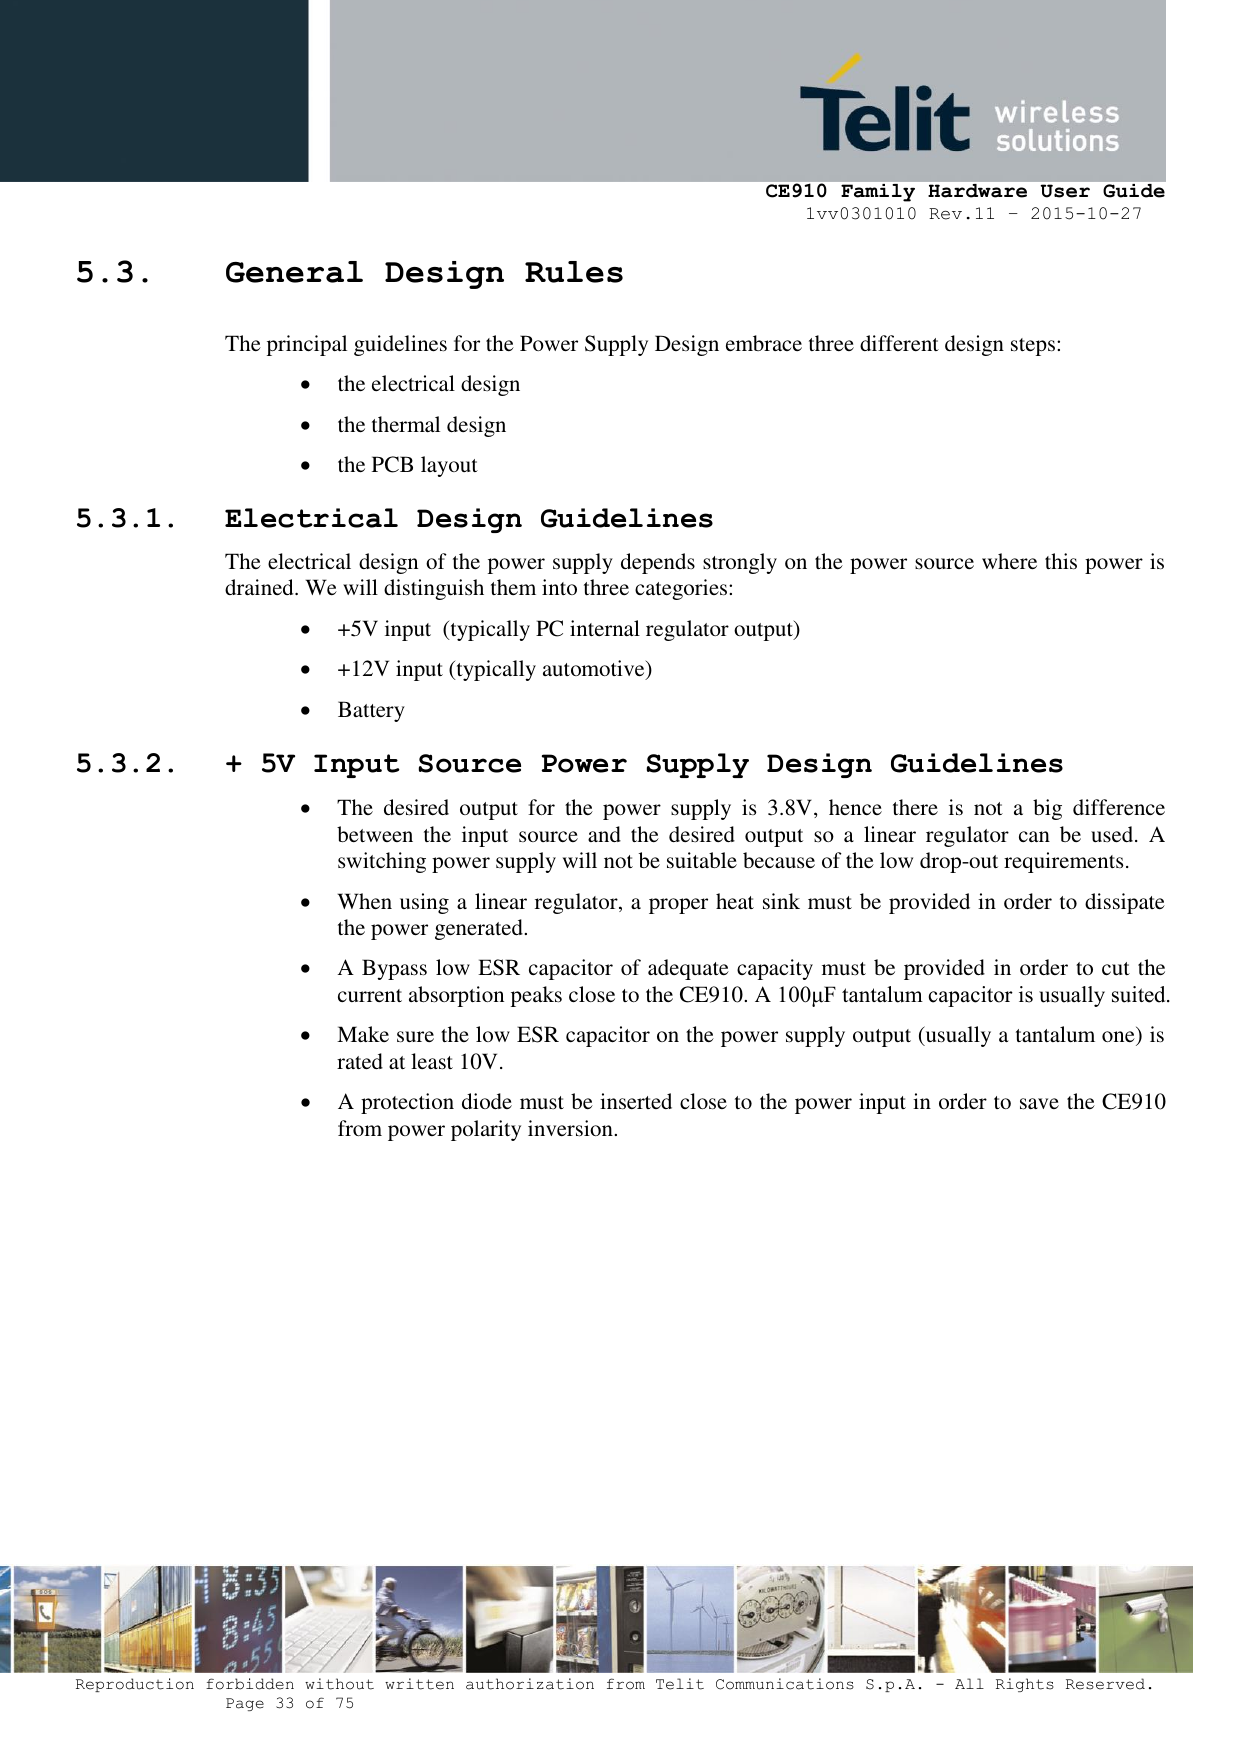     CE910 Family Hardware User Guide 1vv0301010 Rev.11 – 2015-10-27 Reproduction forbidden without written authorization from Telit Communications S.p.A. - All Rights Reserved.    Page 33 of 75                                                     5.3. General Design Rules The principal guidelines for the Power Supply Design embrace three different design steps:  the electrical design  the thermal design  the PCB layout 5.3.1. Electrical Design Guidelines The electrical design of the power supply depends strongly on the power source where this power is drained. We will distinguish them into three categories:  +5V input  (typically PC internal regulator output)  +12V input (typically automotive)  Battery 5.3.2. + 5V Input Source Power Supply Design Guidelines  The  desired  output  for  the  power  supply  is  3.8V,  hence  there  is  not  a  big  difference between  the  input  source  and  the  desired  output  so  a  linear  regulator  can  be  used.  A switching power supply will not be suitable because of the low drop-out requirements.  When using a linear regulator, a proper heat sink must be provided in order to dissipate the power generated.  A Bypass low ESR capacitor of adequate capacity must be provided in order to cut the current absorption peaks close to the CE910. A 100μF tantalum capacitor is usually suited.  Make sure the low ESR capacitor on the power supply output (usually a tantalum one) is rated at least 10V.  A protection diode must be inserted close to the power input in order to save the CE910 from power polarity inversion.           